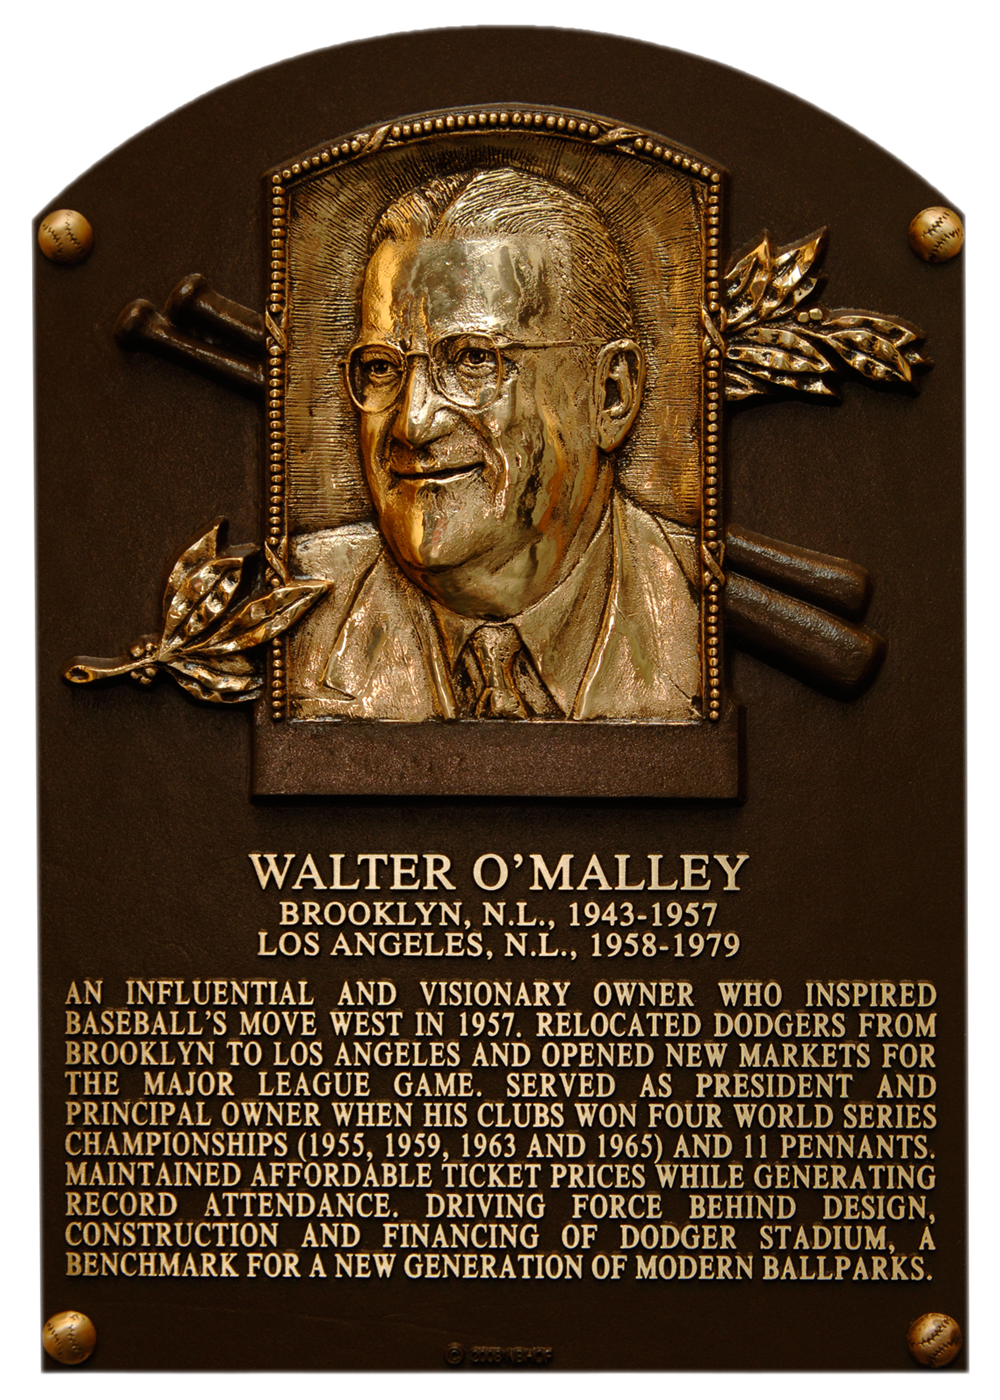 Walter O'Malley Hall of Fame plaque